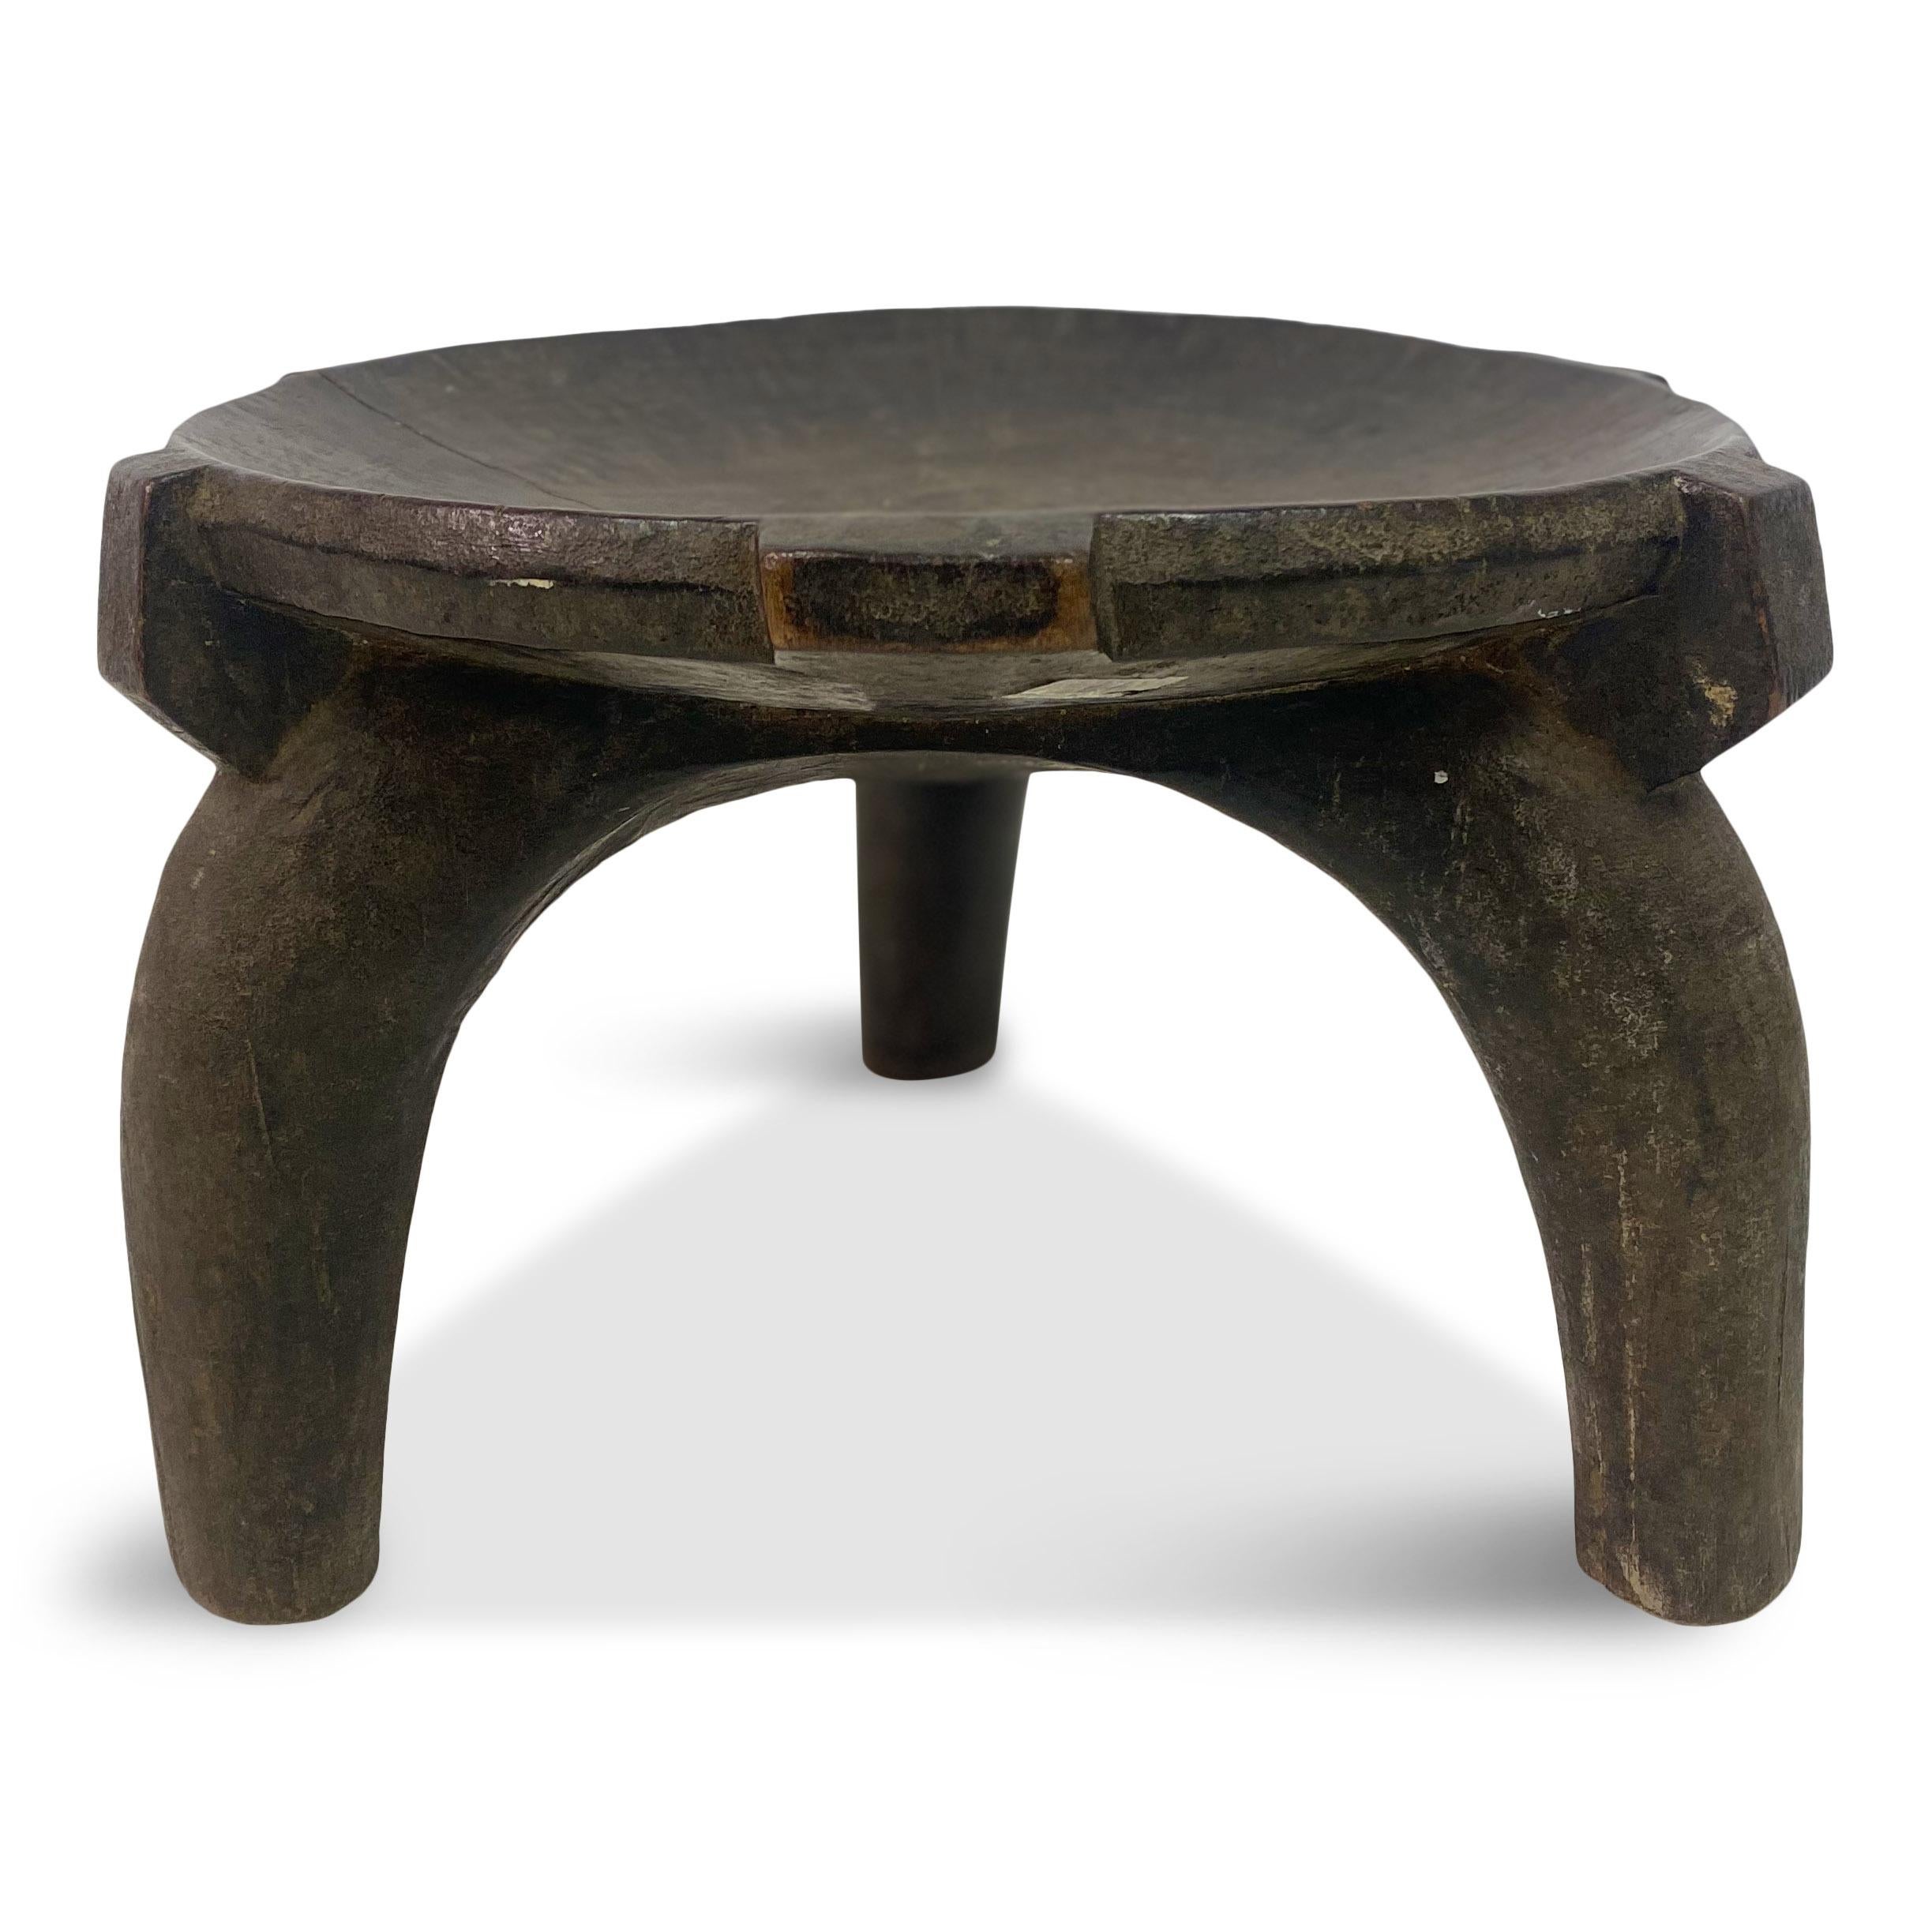 African stool

Possibly Kenyan

Dished seat 

Tripod legs

Early 20th century

One photo shows the stool with a partner.